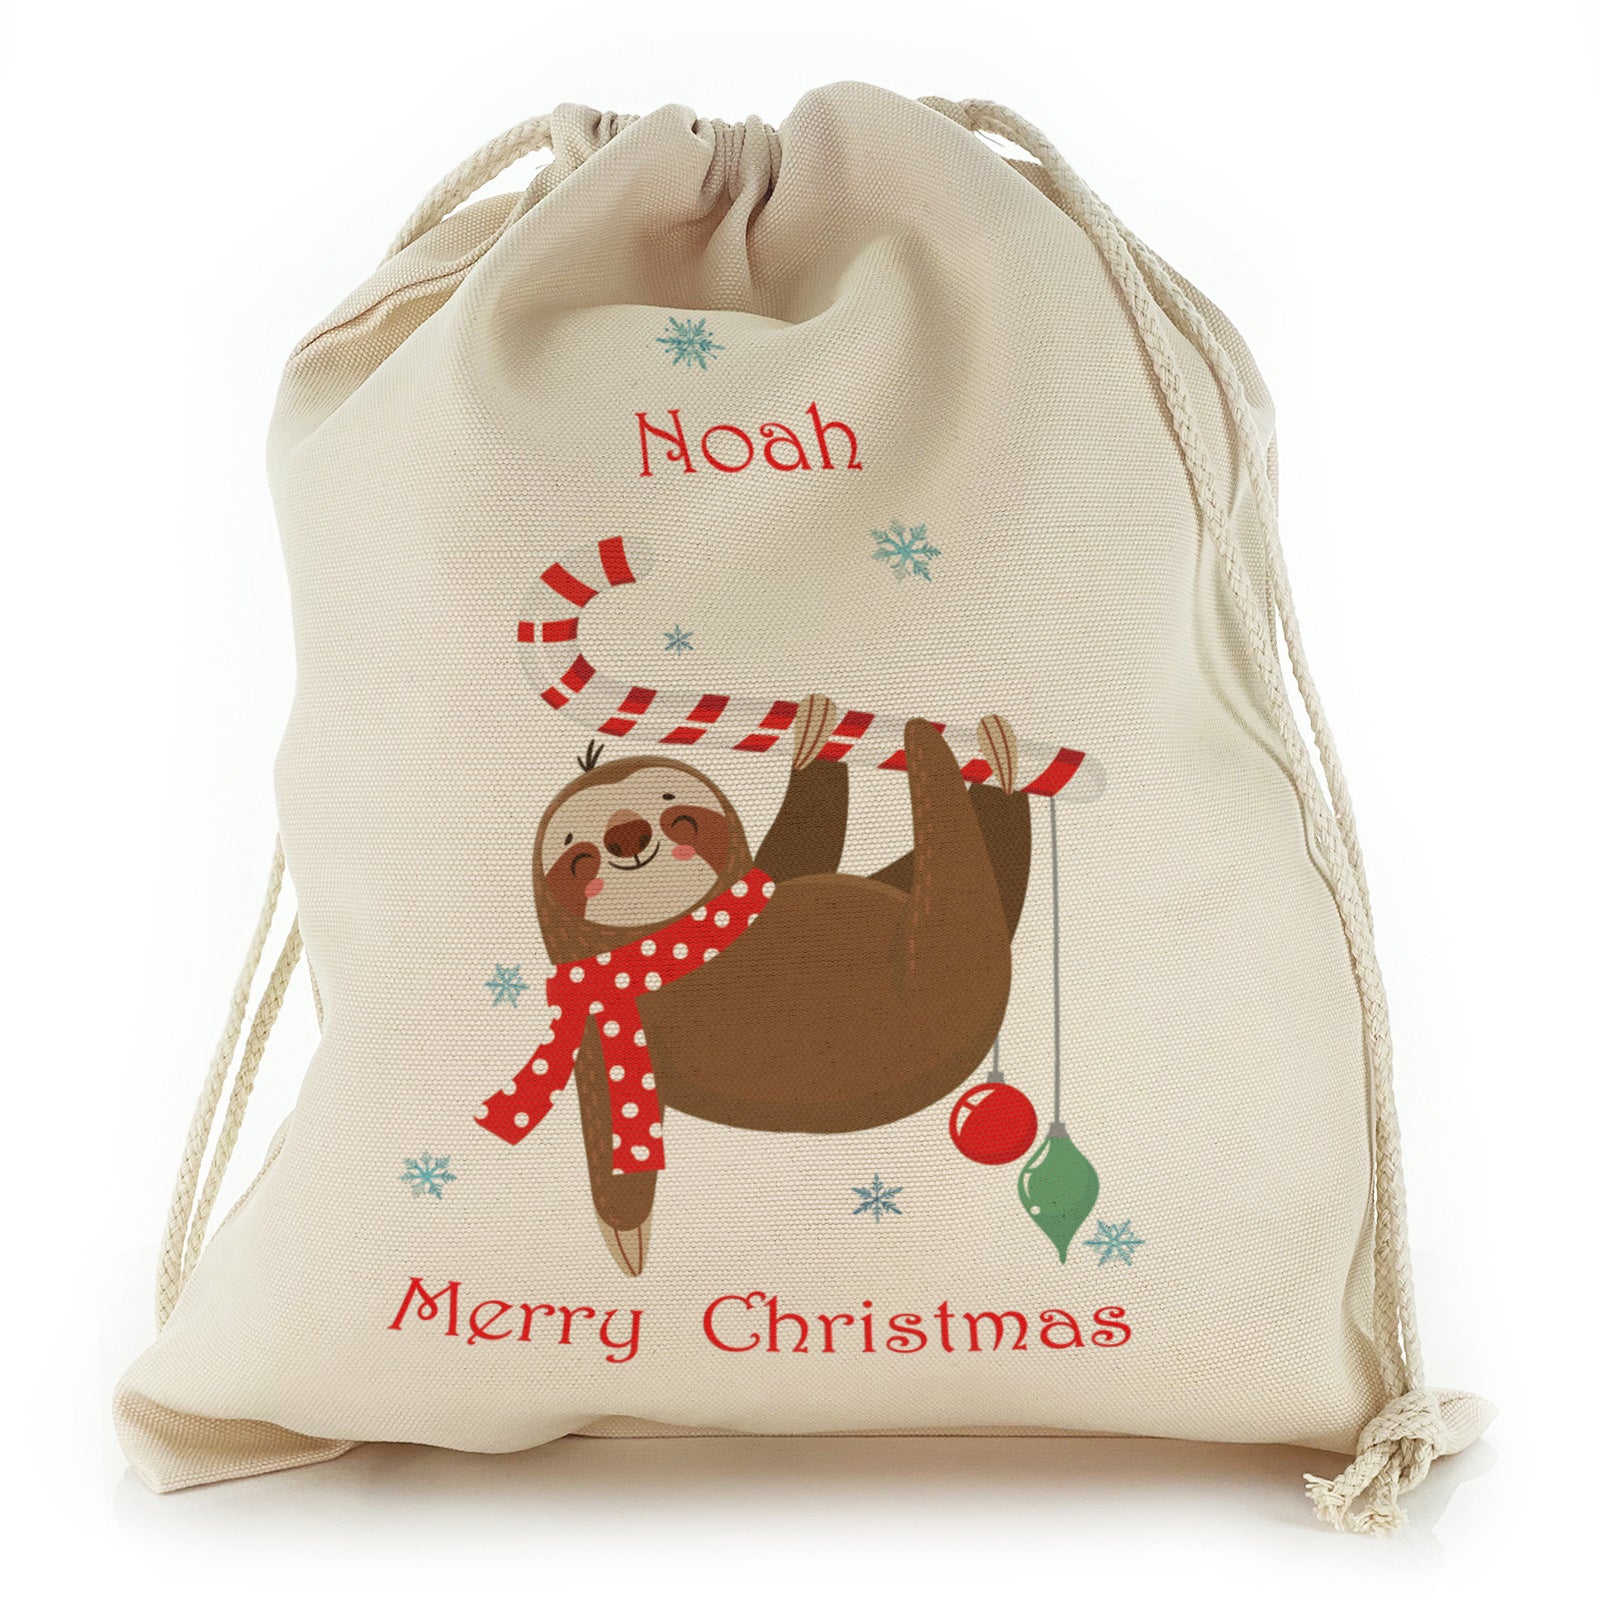 Personalised Canvas Sack with Festive Text and Candy Cane Sloth